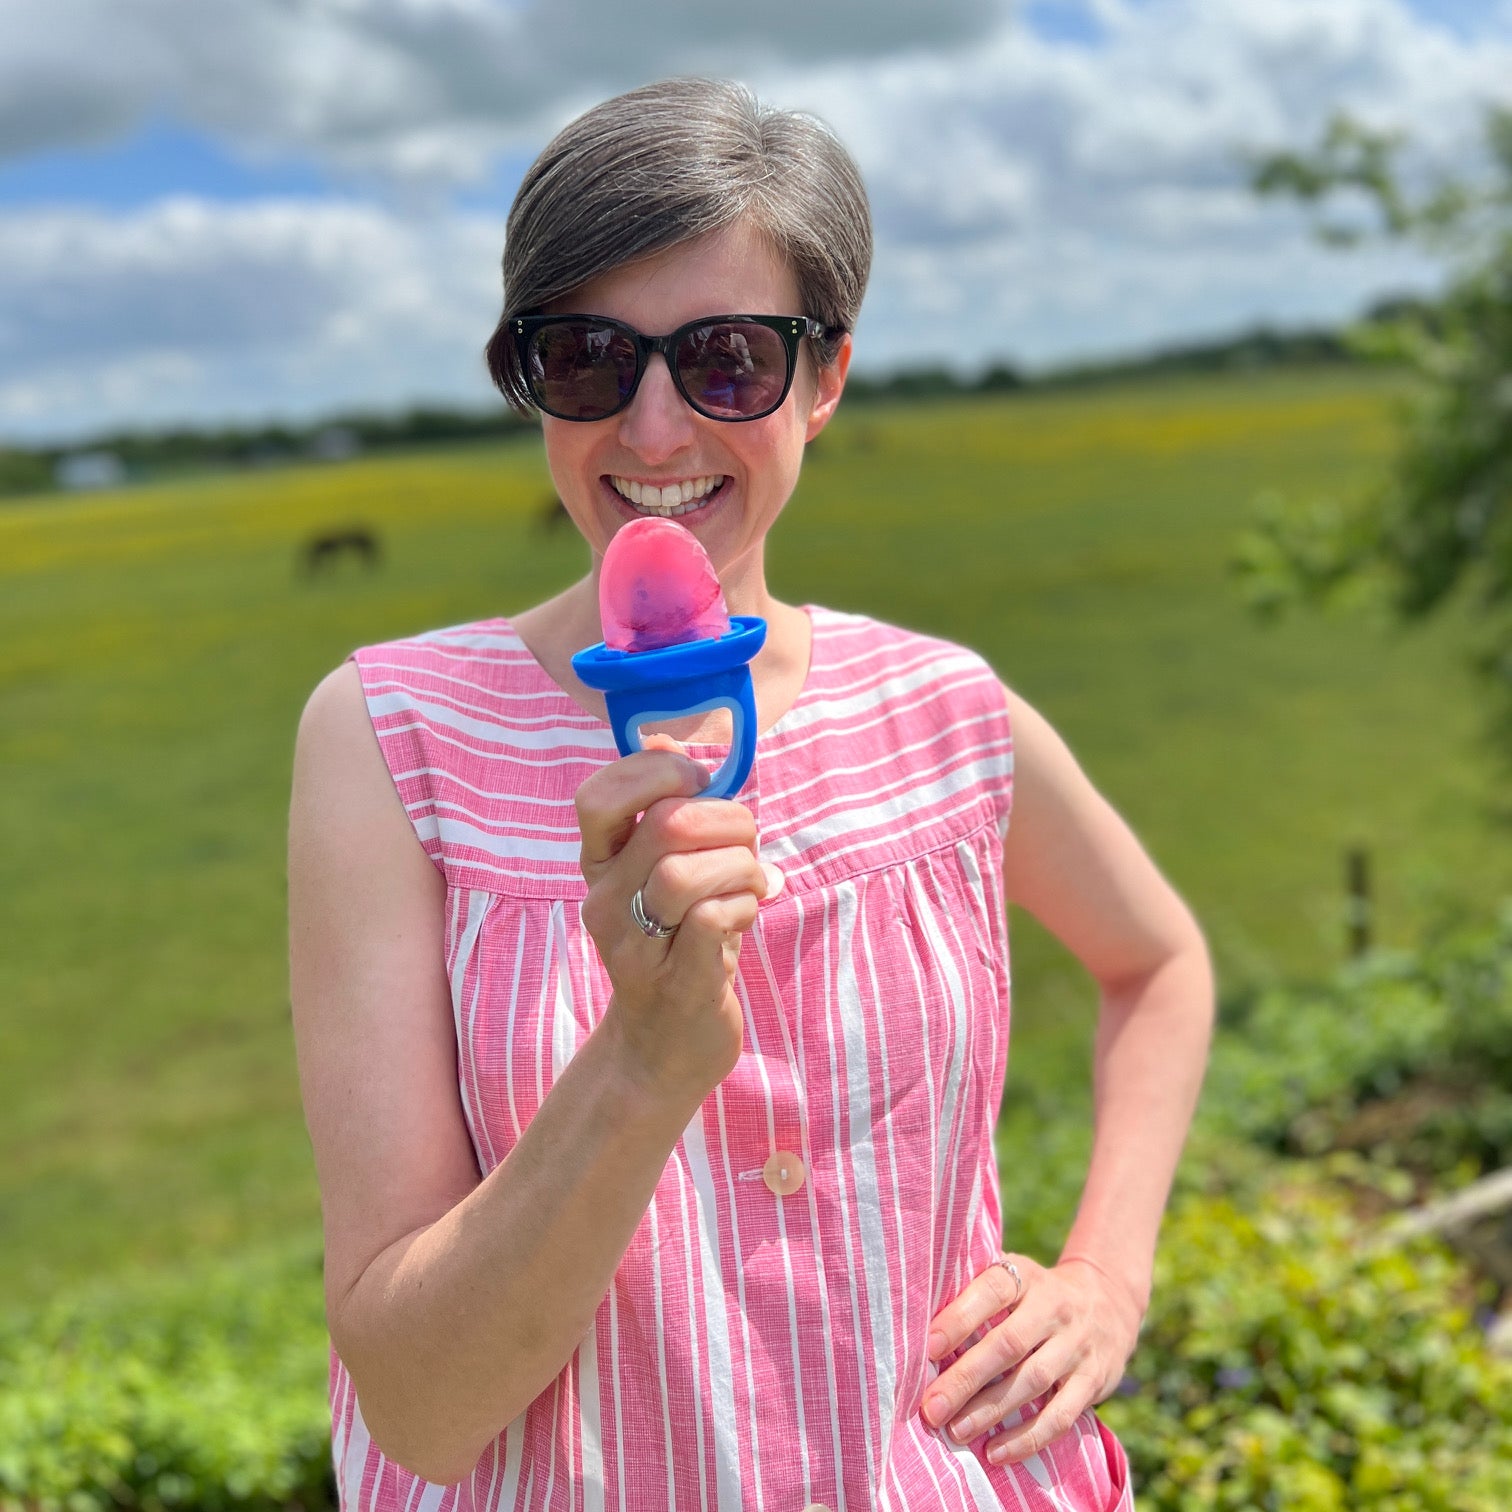 Woman stood in sunny garden, holding a Get Up And Glow iced lolly and smiling